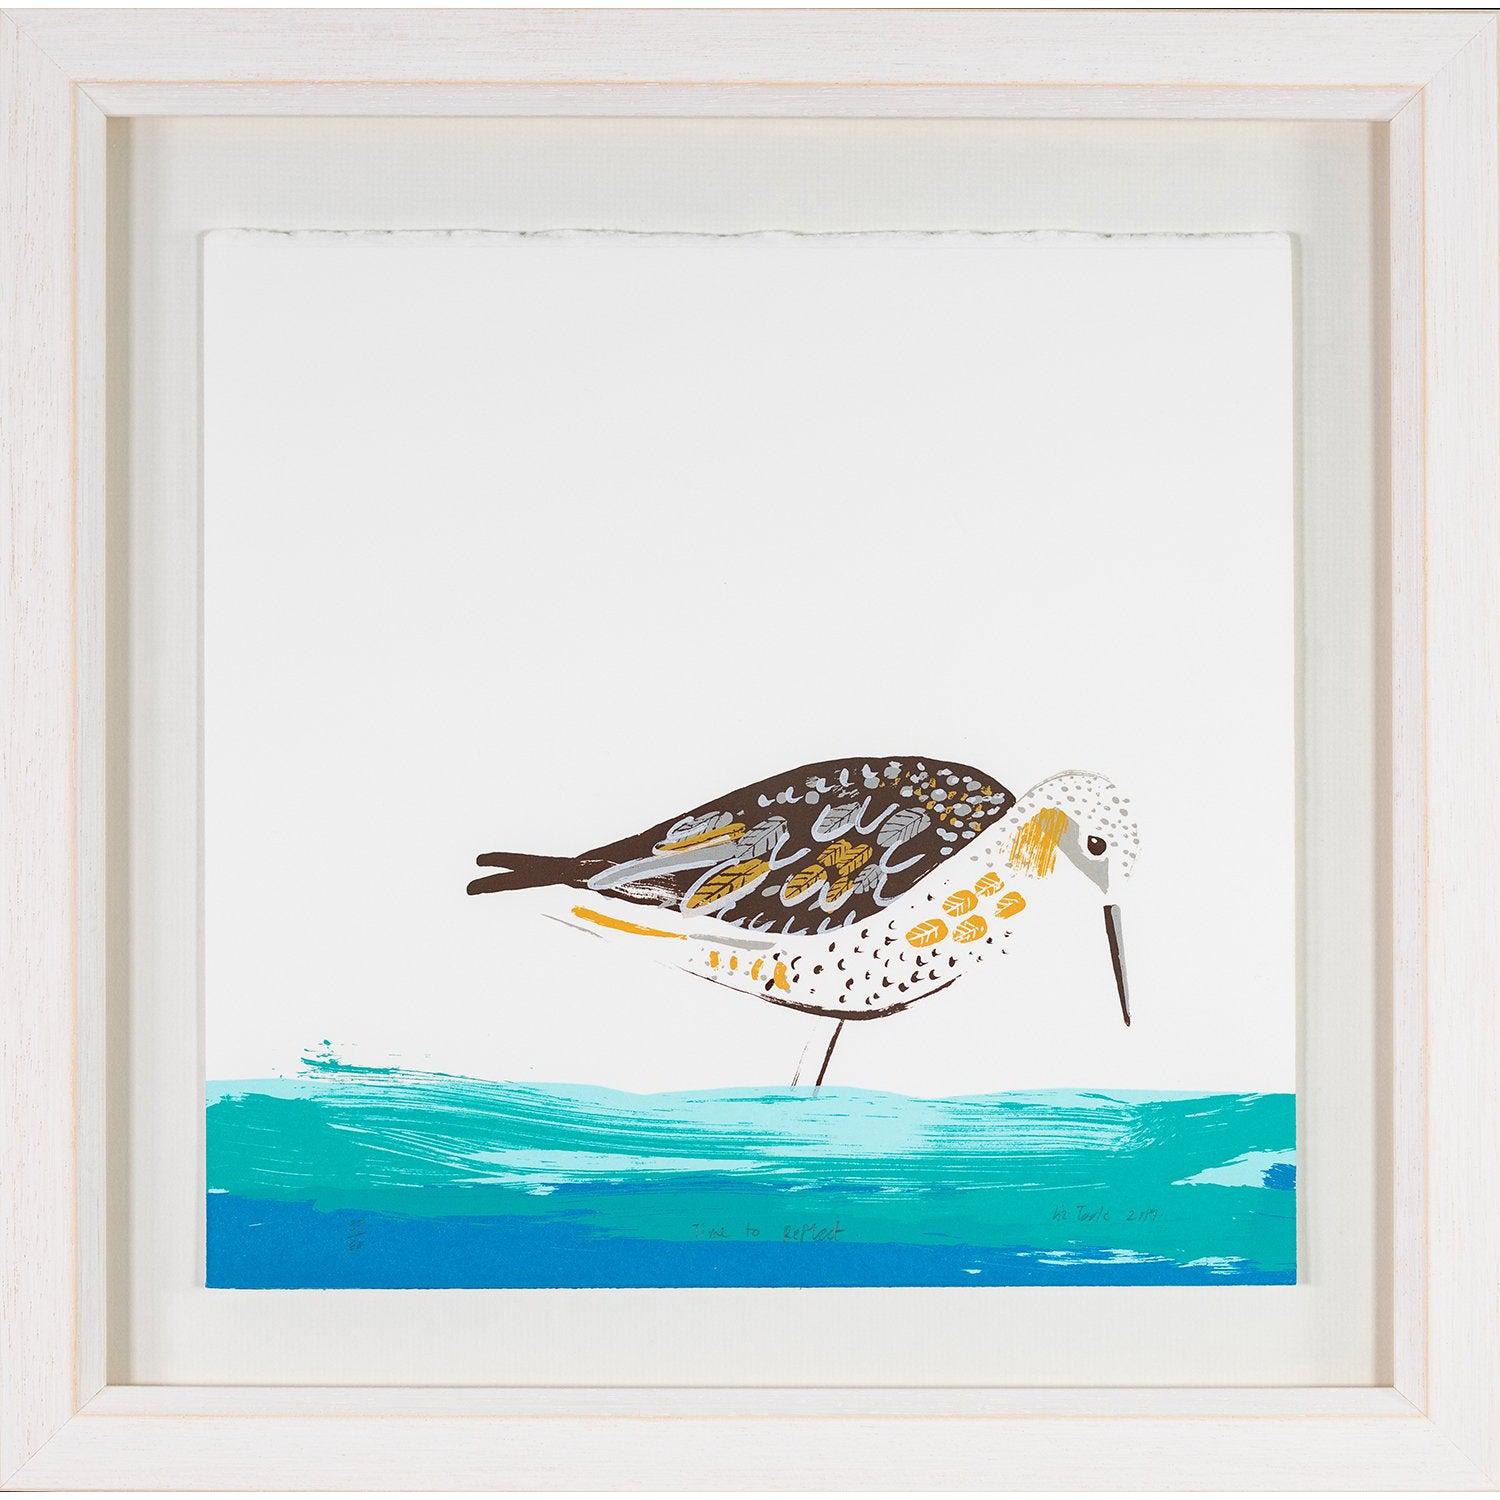 'Time to Reflect' framed, limited edition print by Liz Toole - print also available unframed at Padstow Gallery, Cornwall.